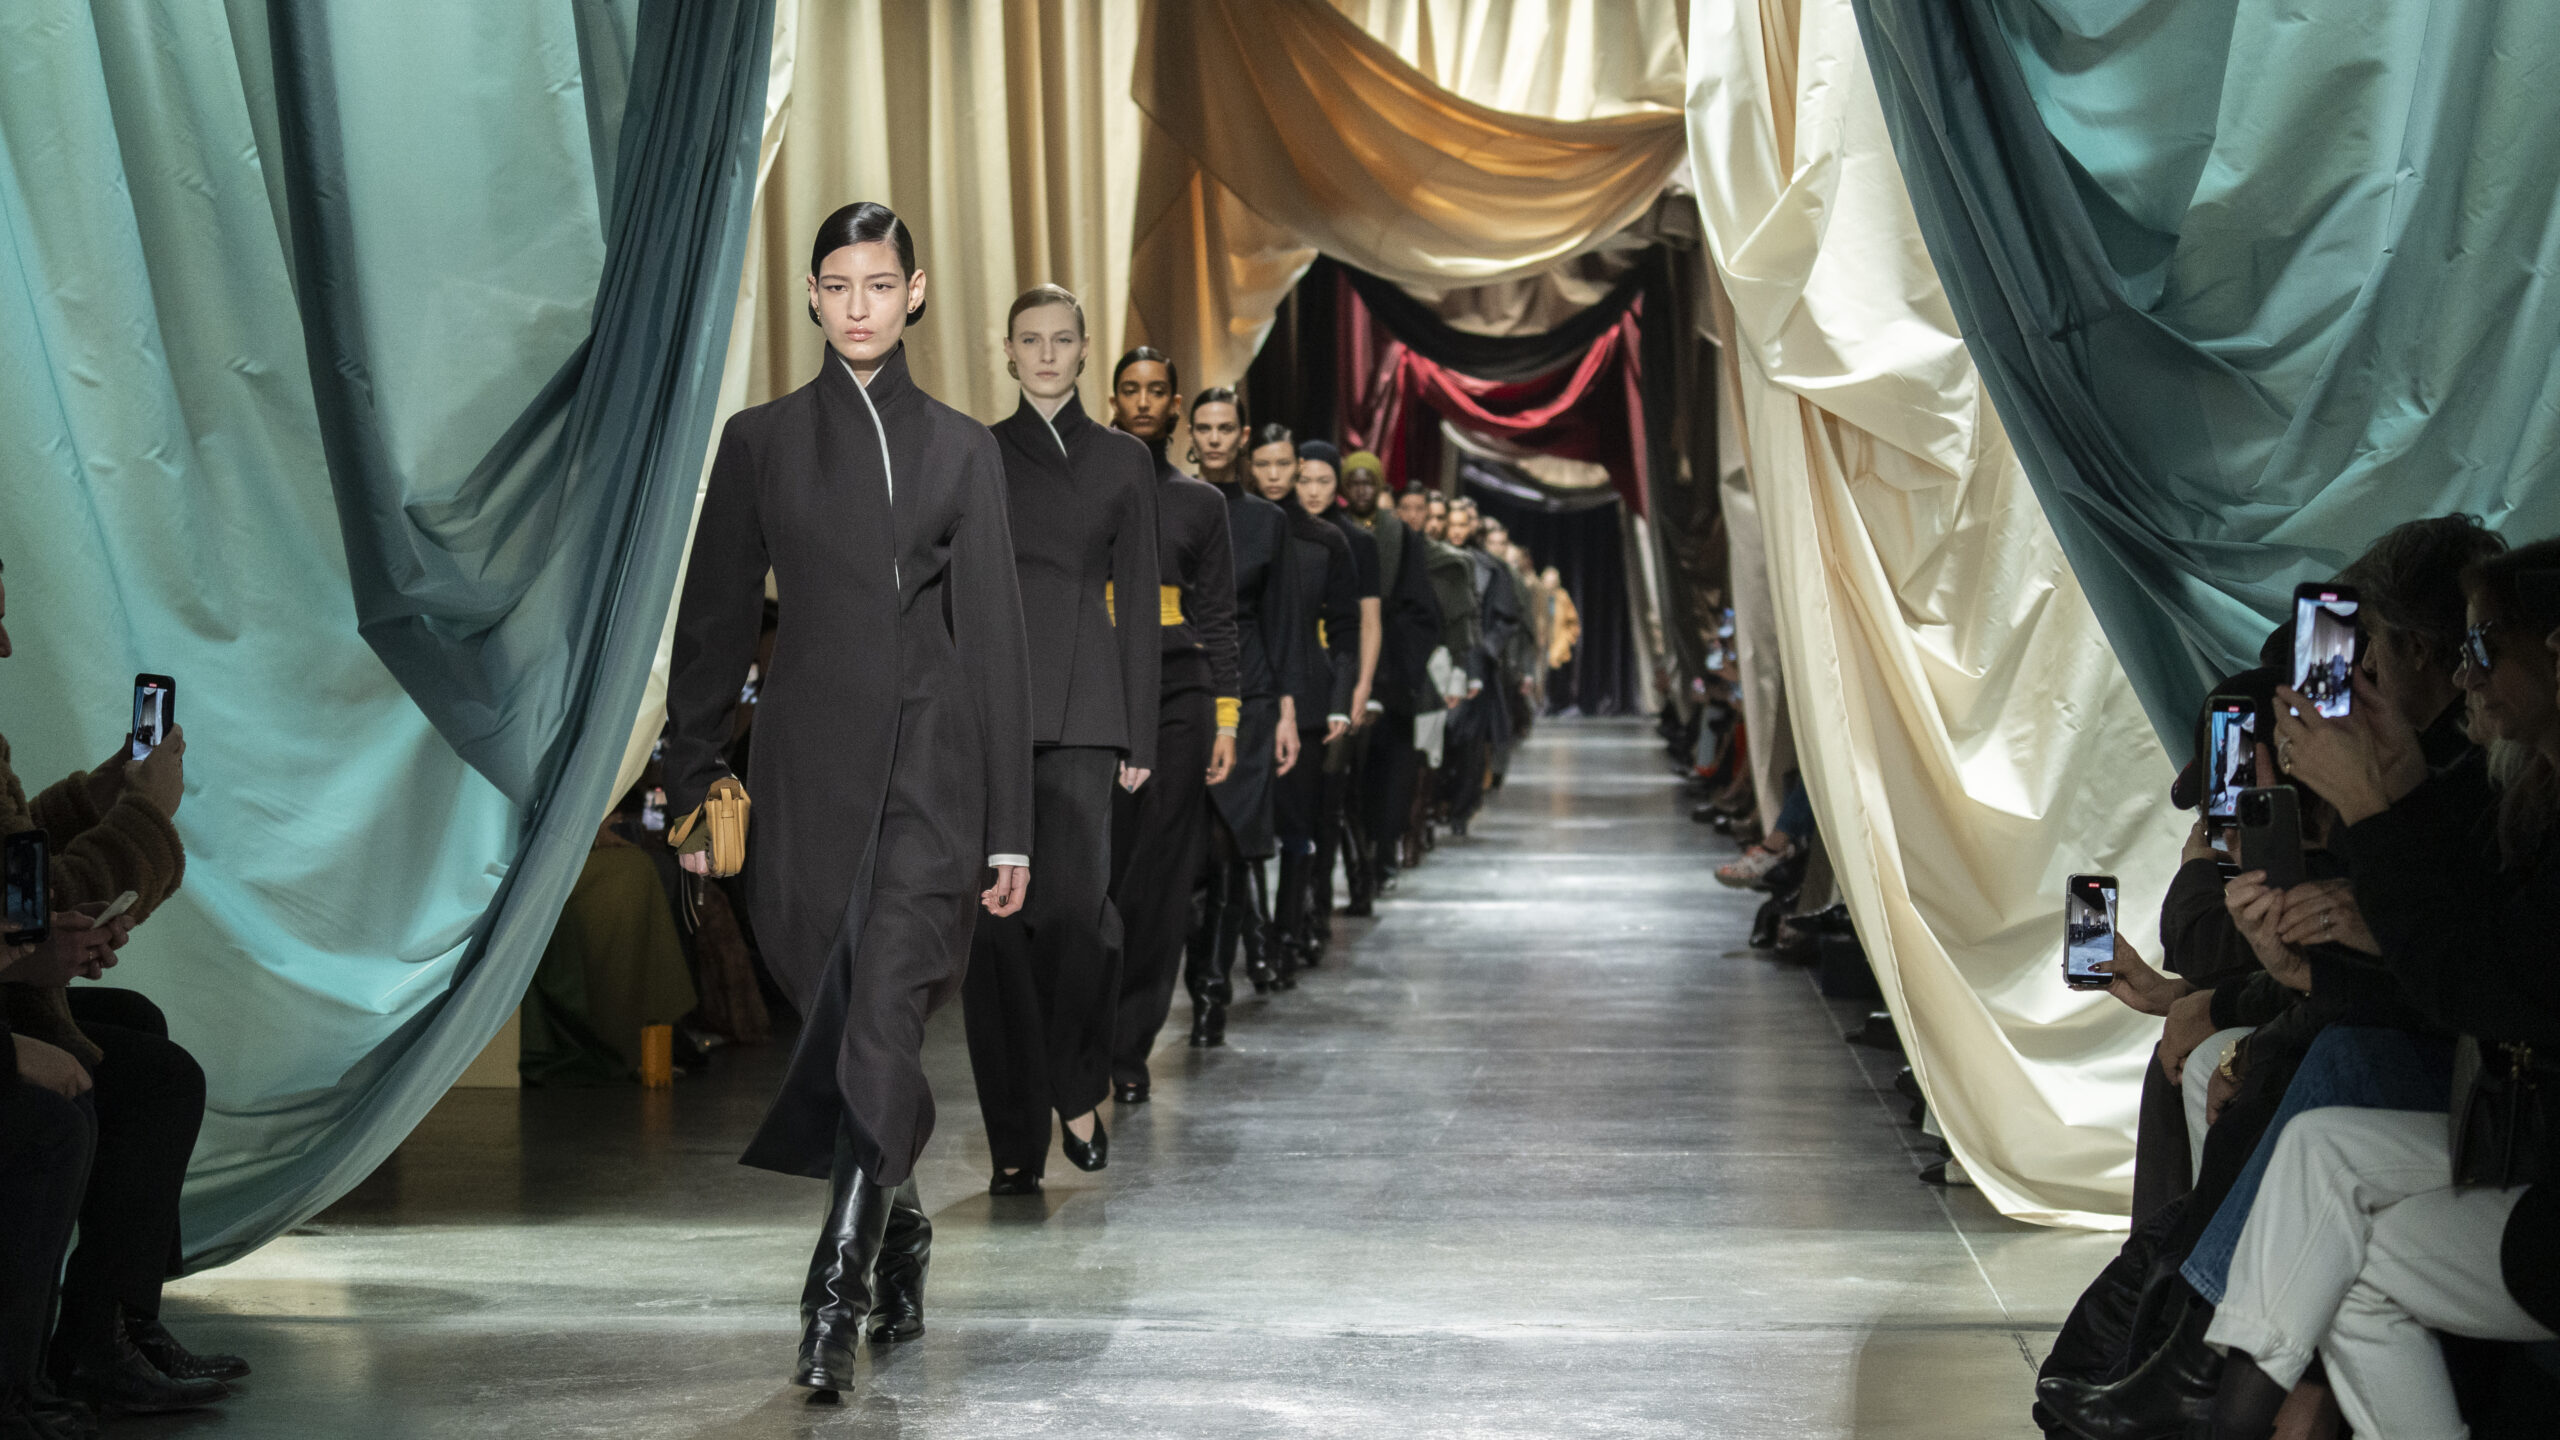 A procession of models striding down the runway in a fashion show, clad in Fendi's Autumn/Winter 2024-25 collection. The opulent setting features draped fabrics in pastel and neutral tones along the catwalk, with an audience capturing the moment on their smartphones.